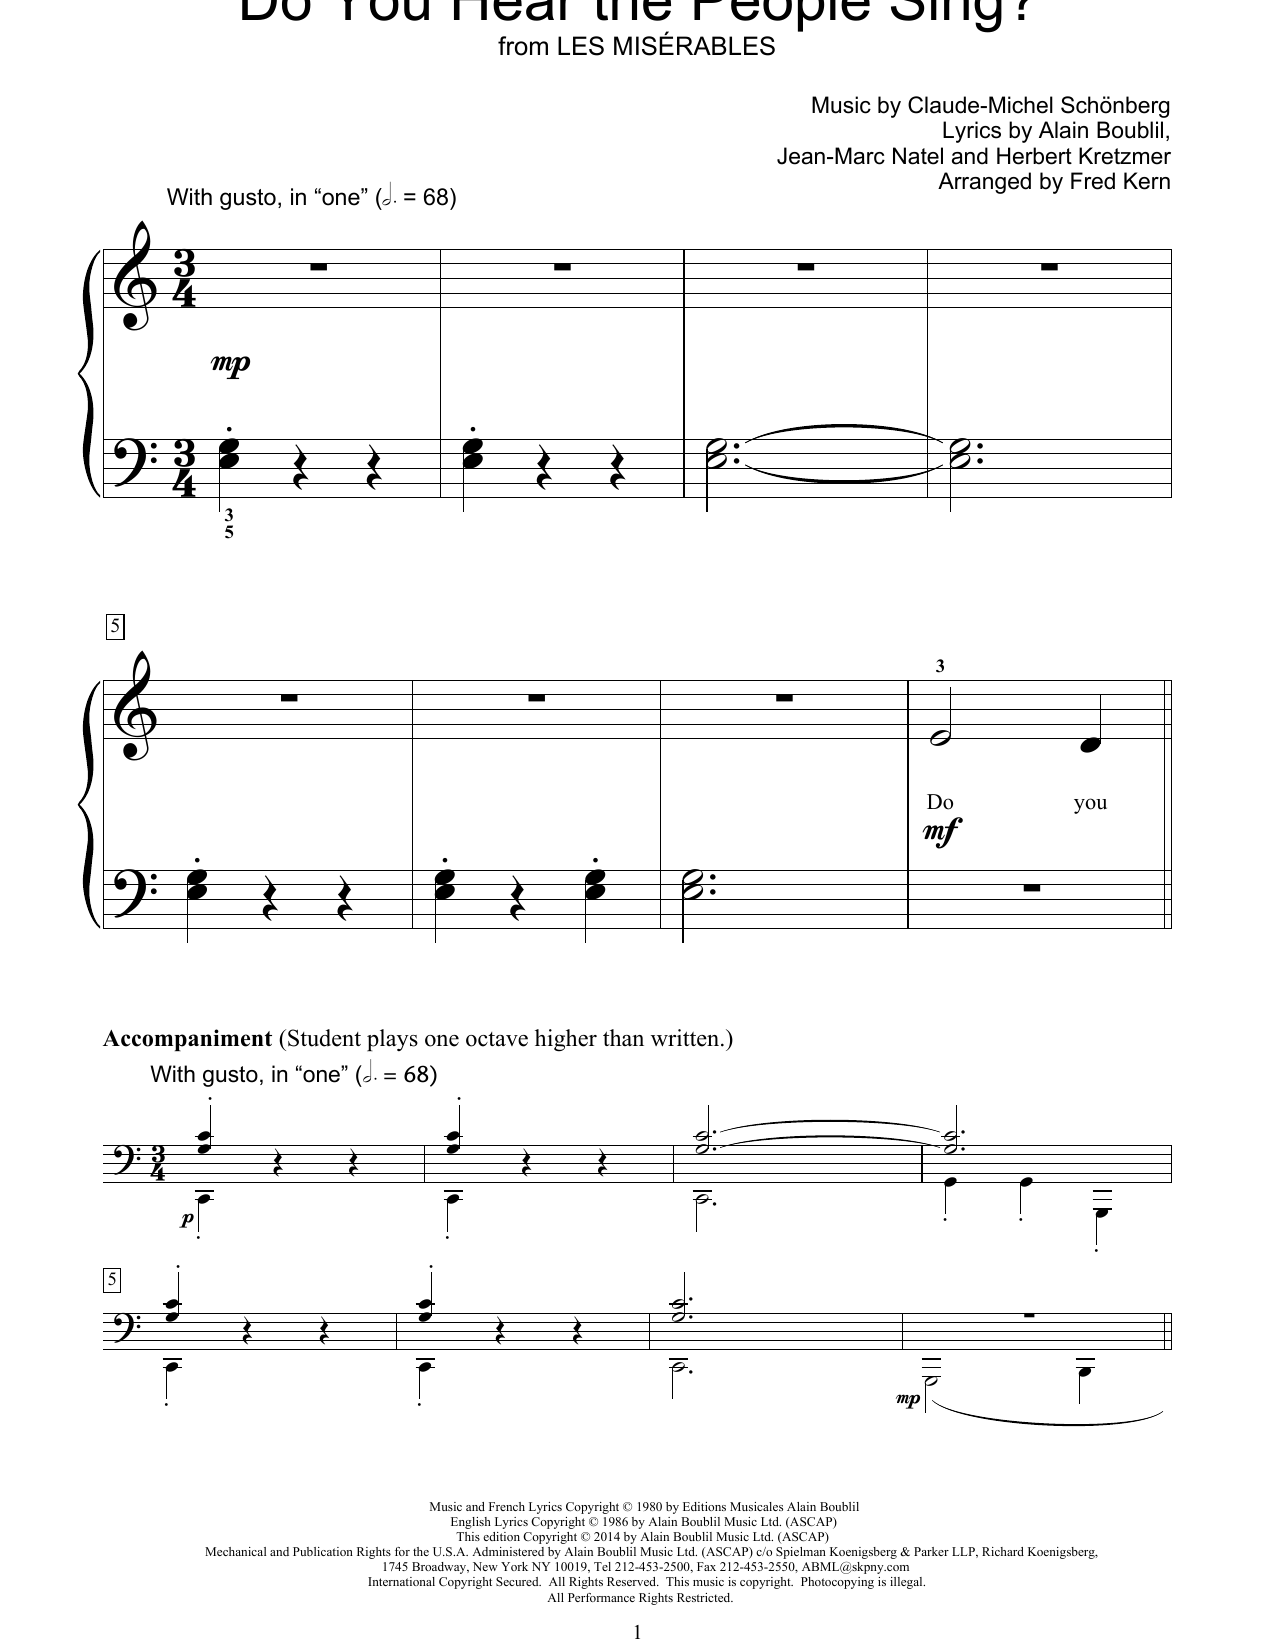 Download Fred Kern Do You Hear The People Sing? Sheet Music